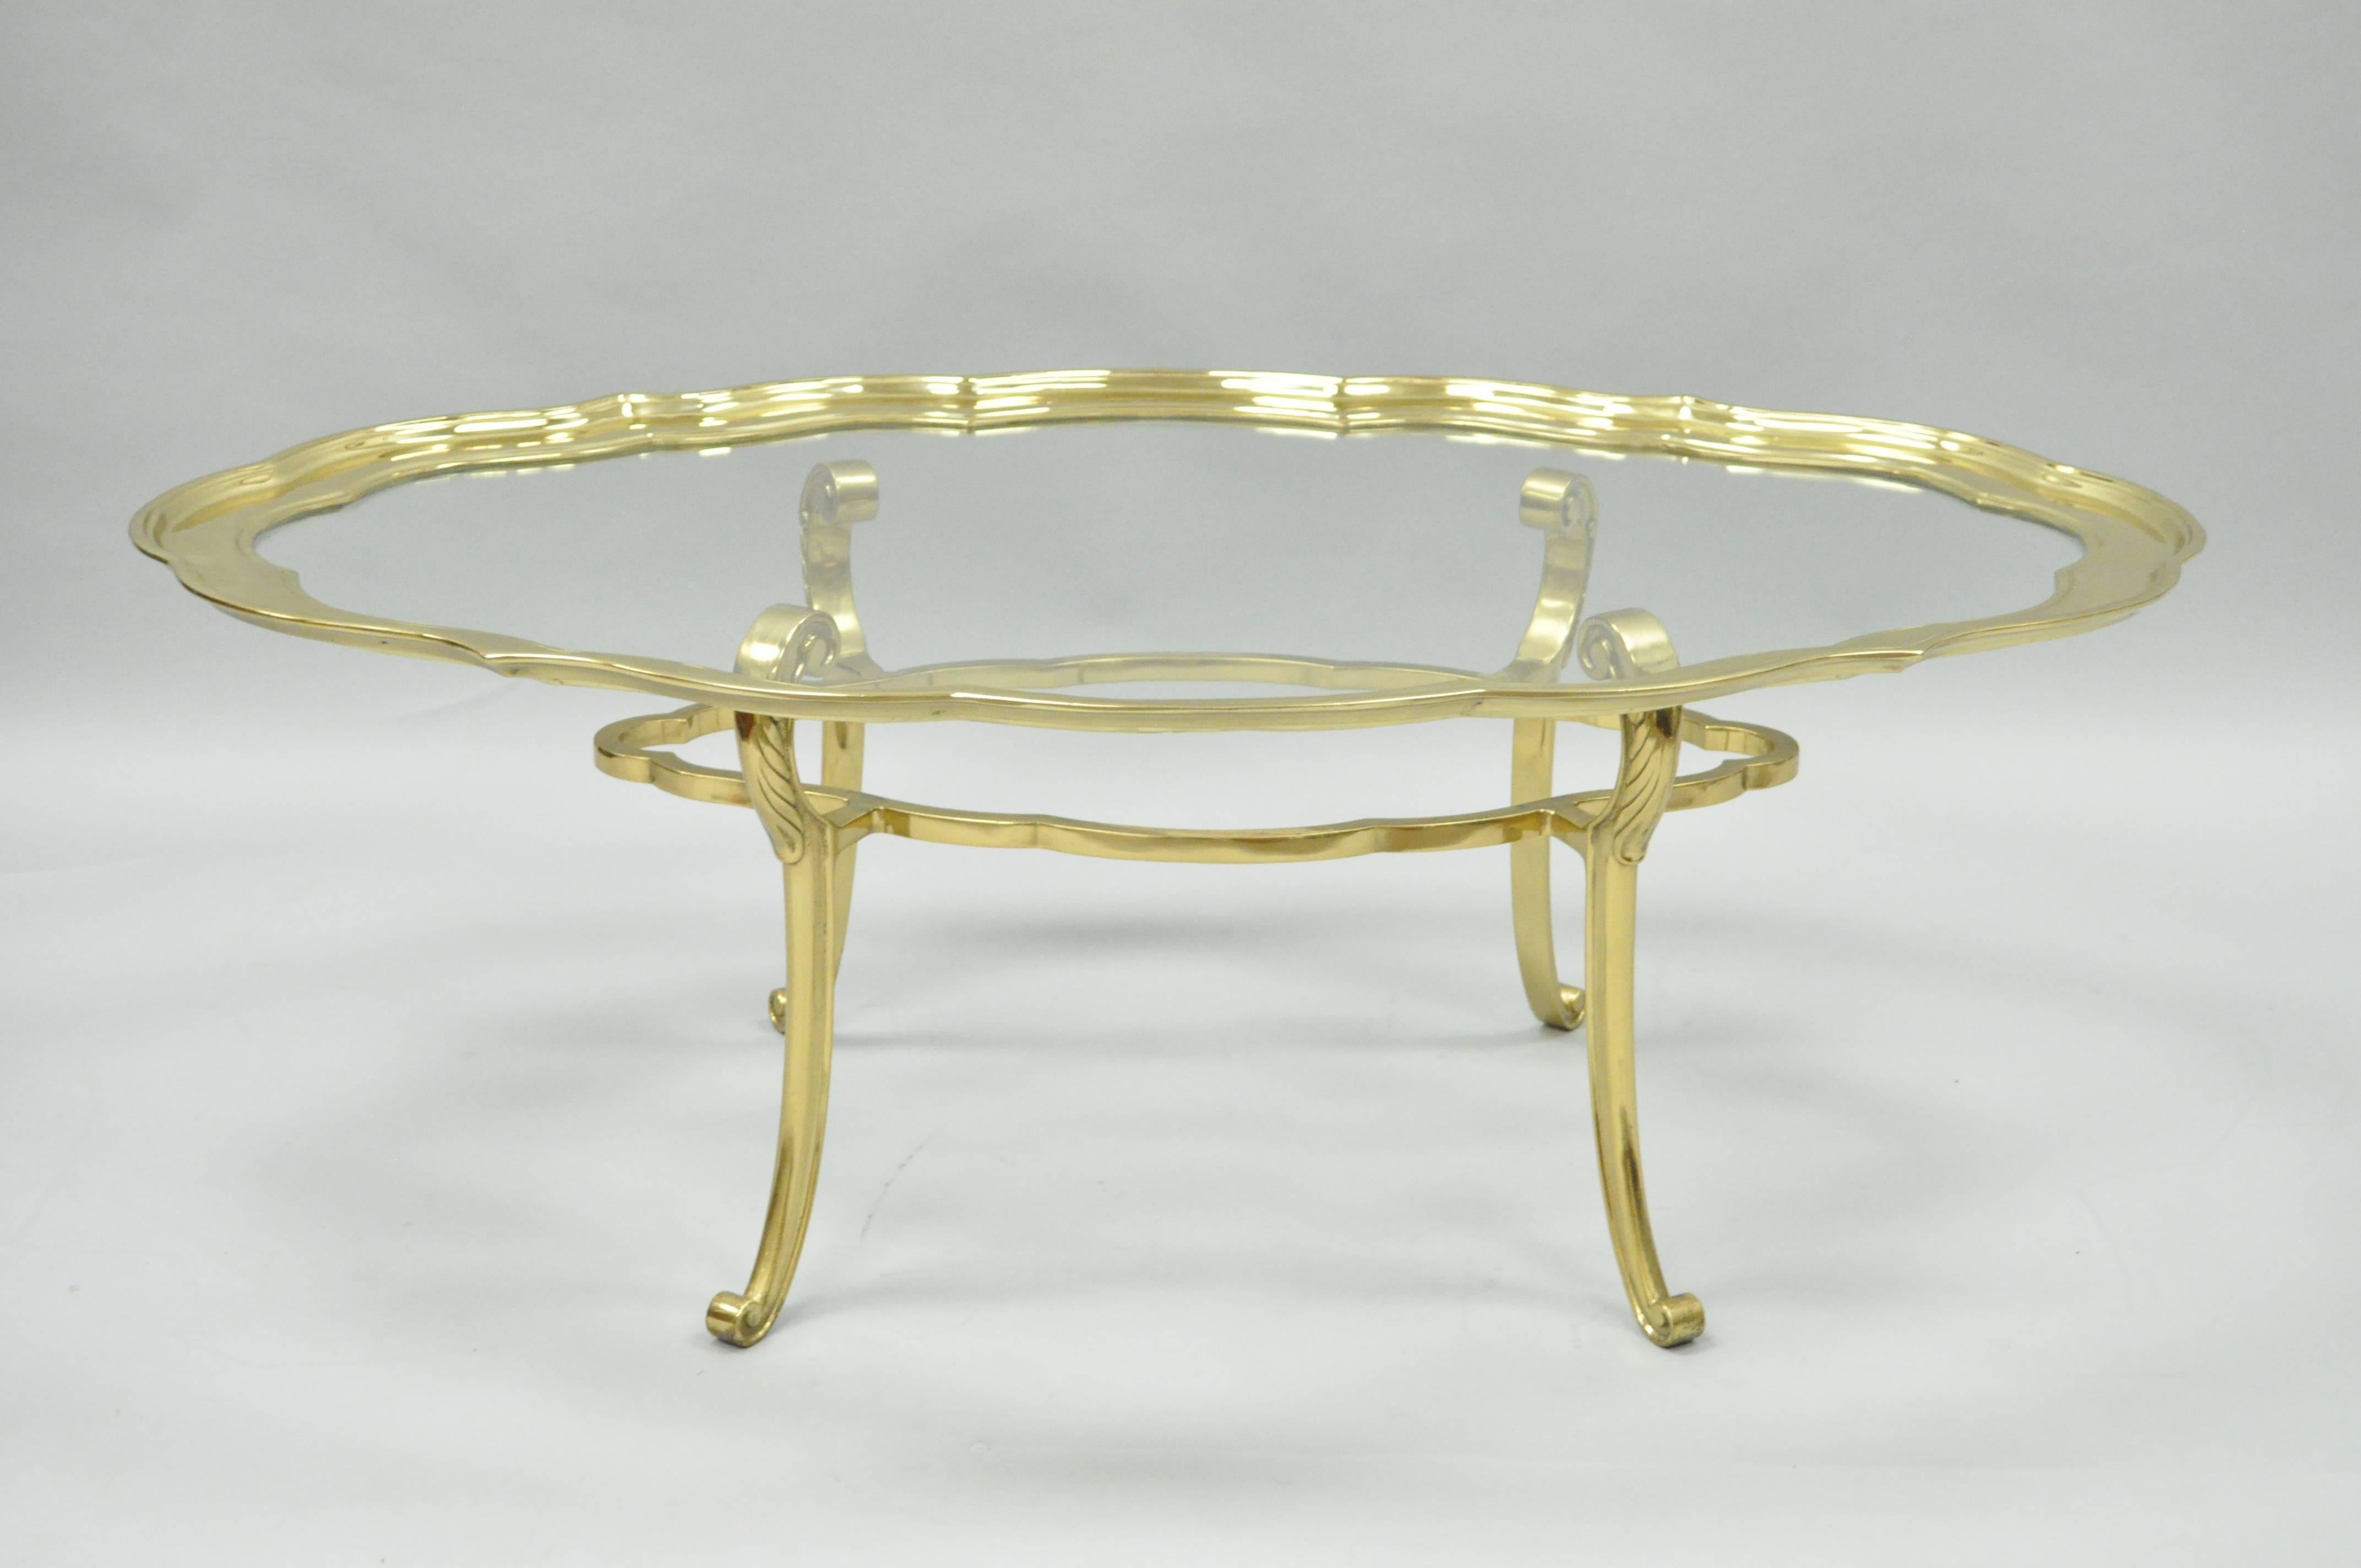 High quality vintage solid brass and glass serving coffee table attributed to Baker Furniture Co. This remarkable Hollywood Regency coffee table features a removable top with shaped solid brass border and glass center. The base is also solid brass